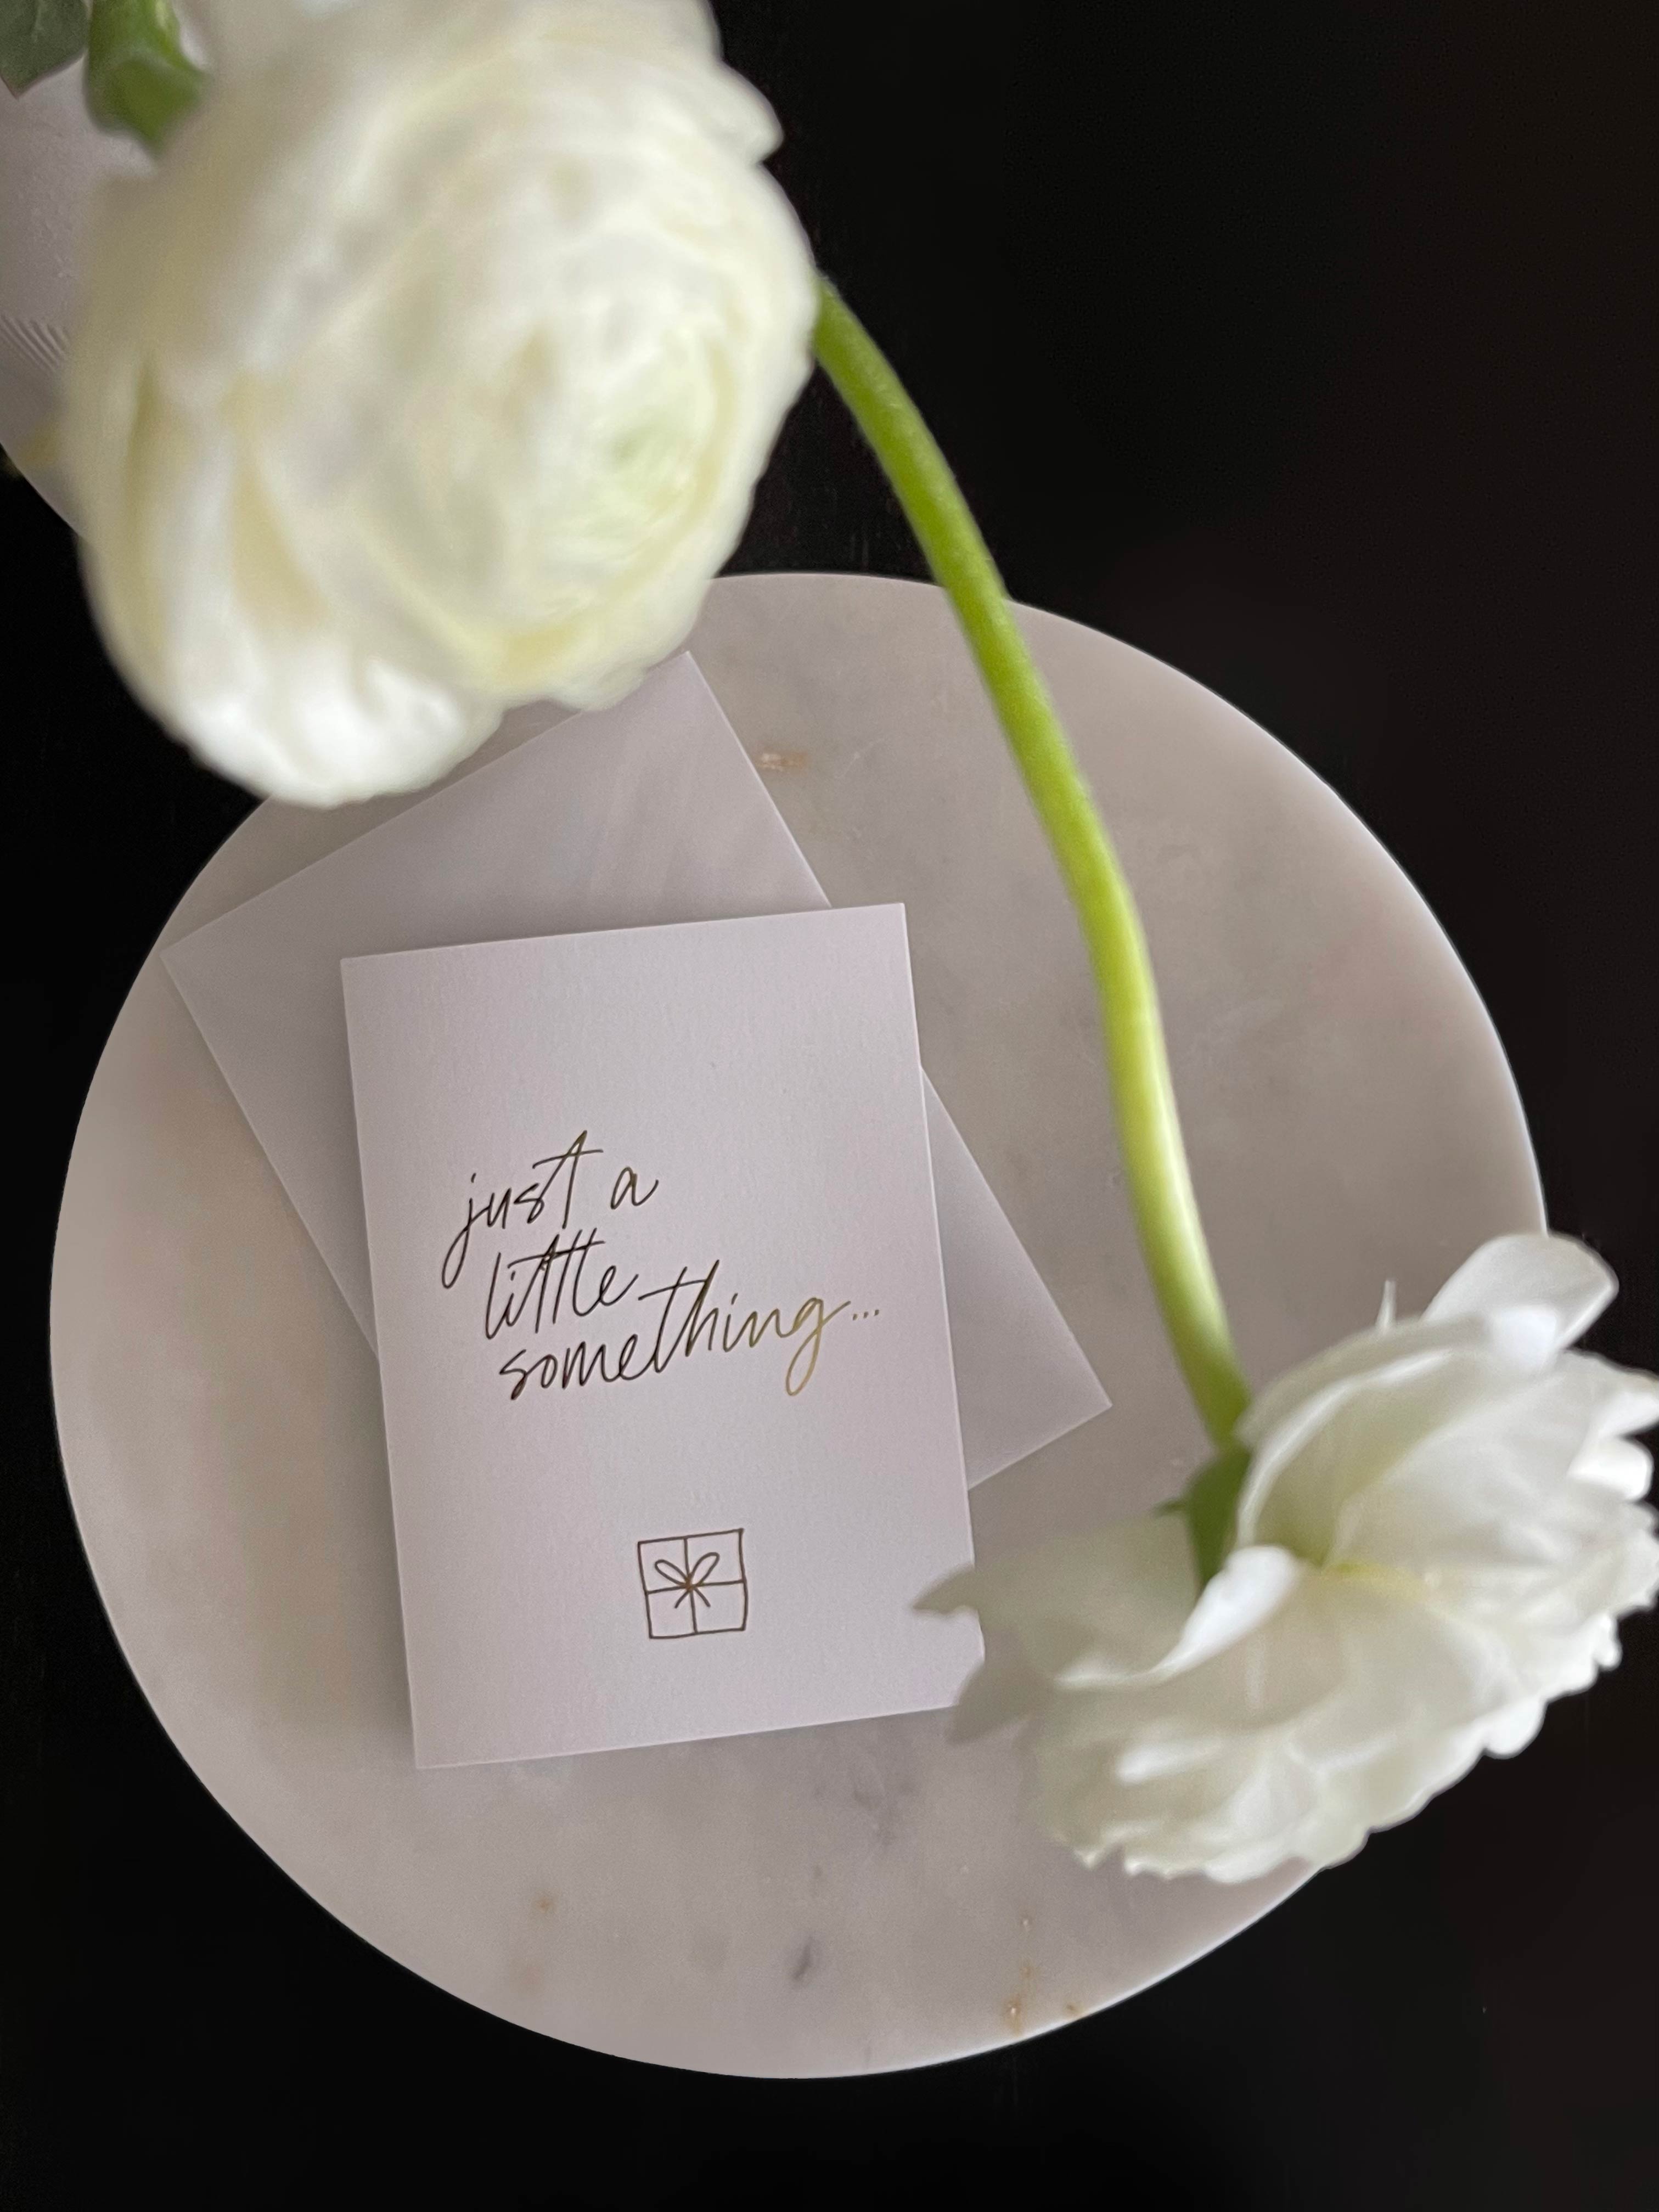 Greeting card "Little Something", A6, white/gold